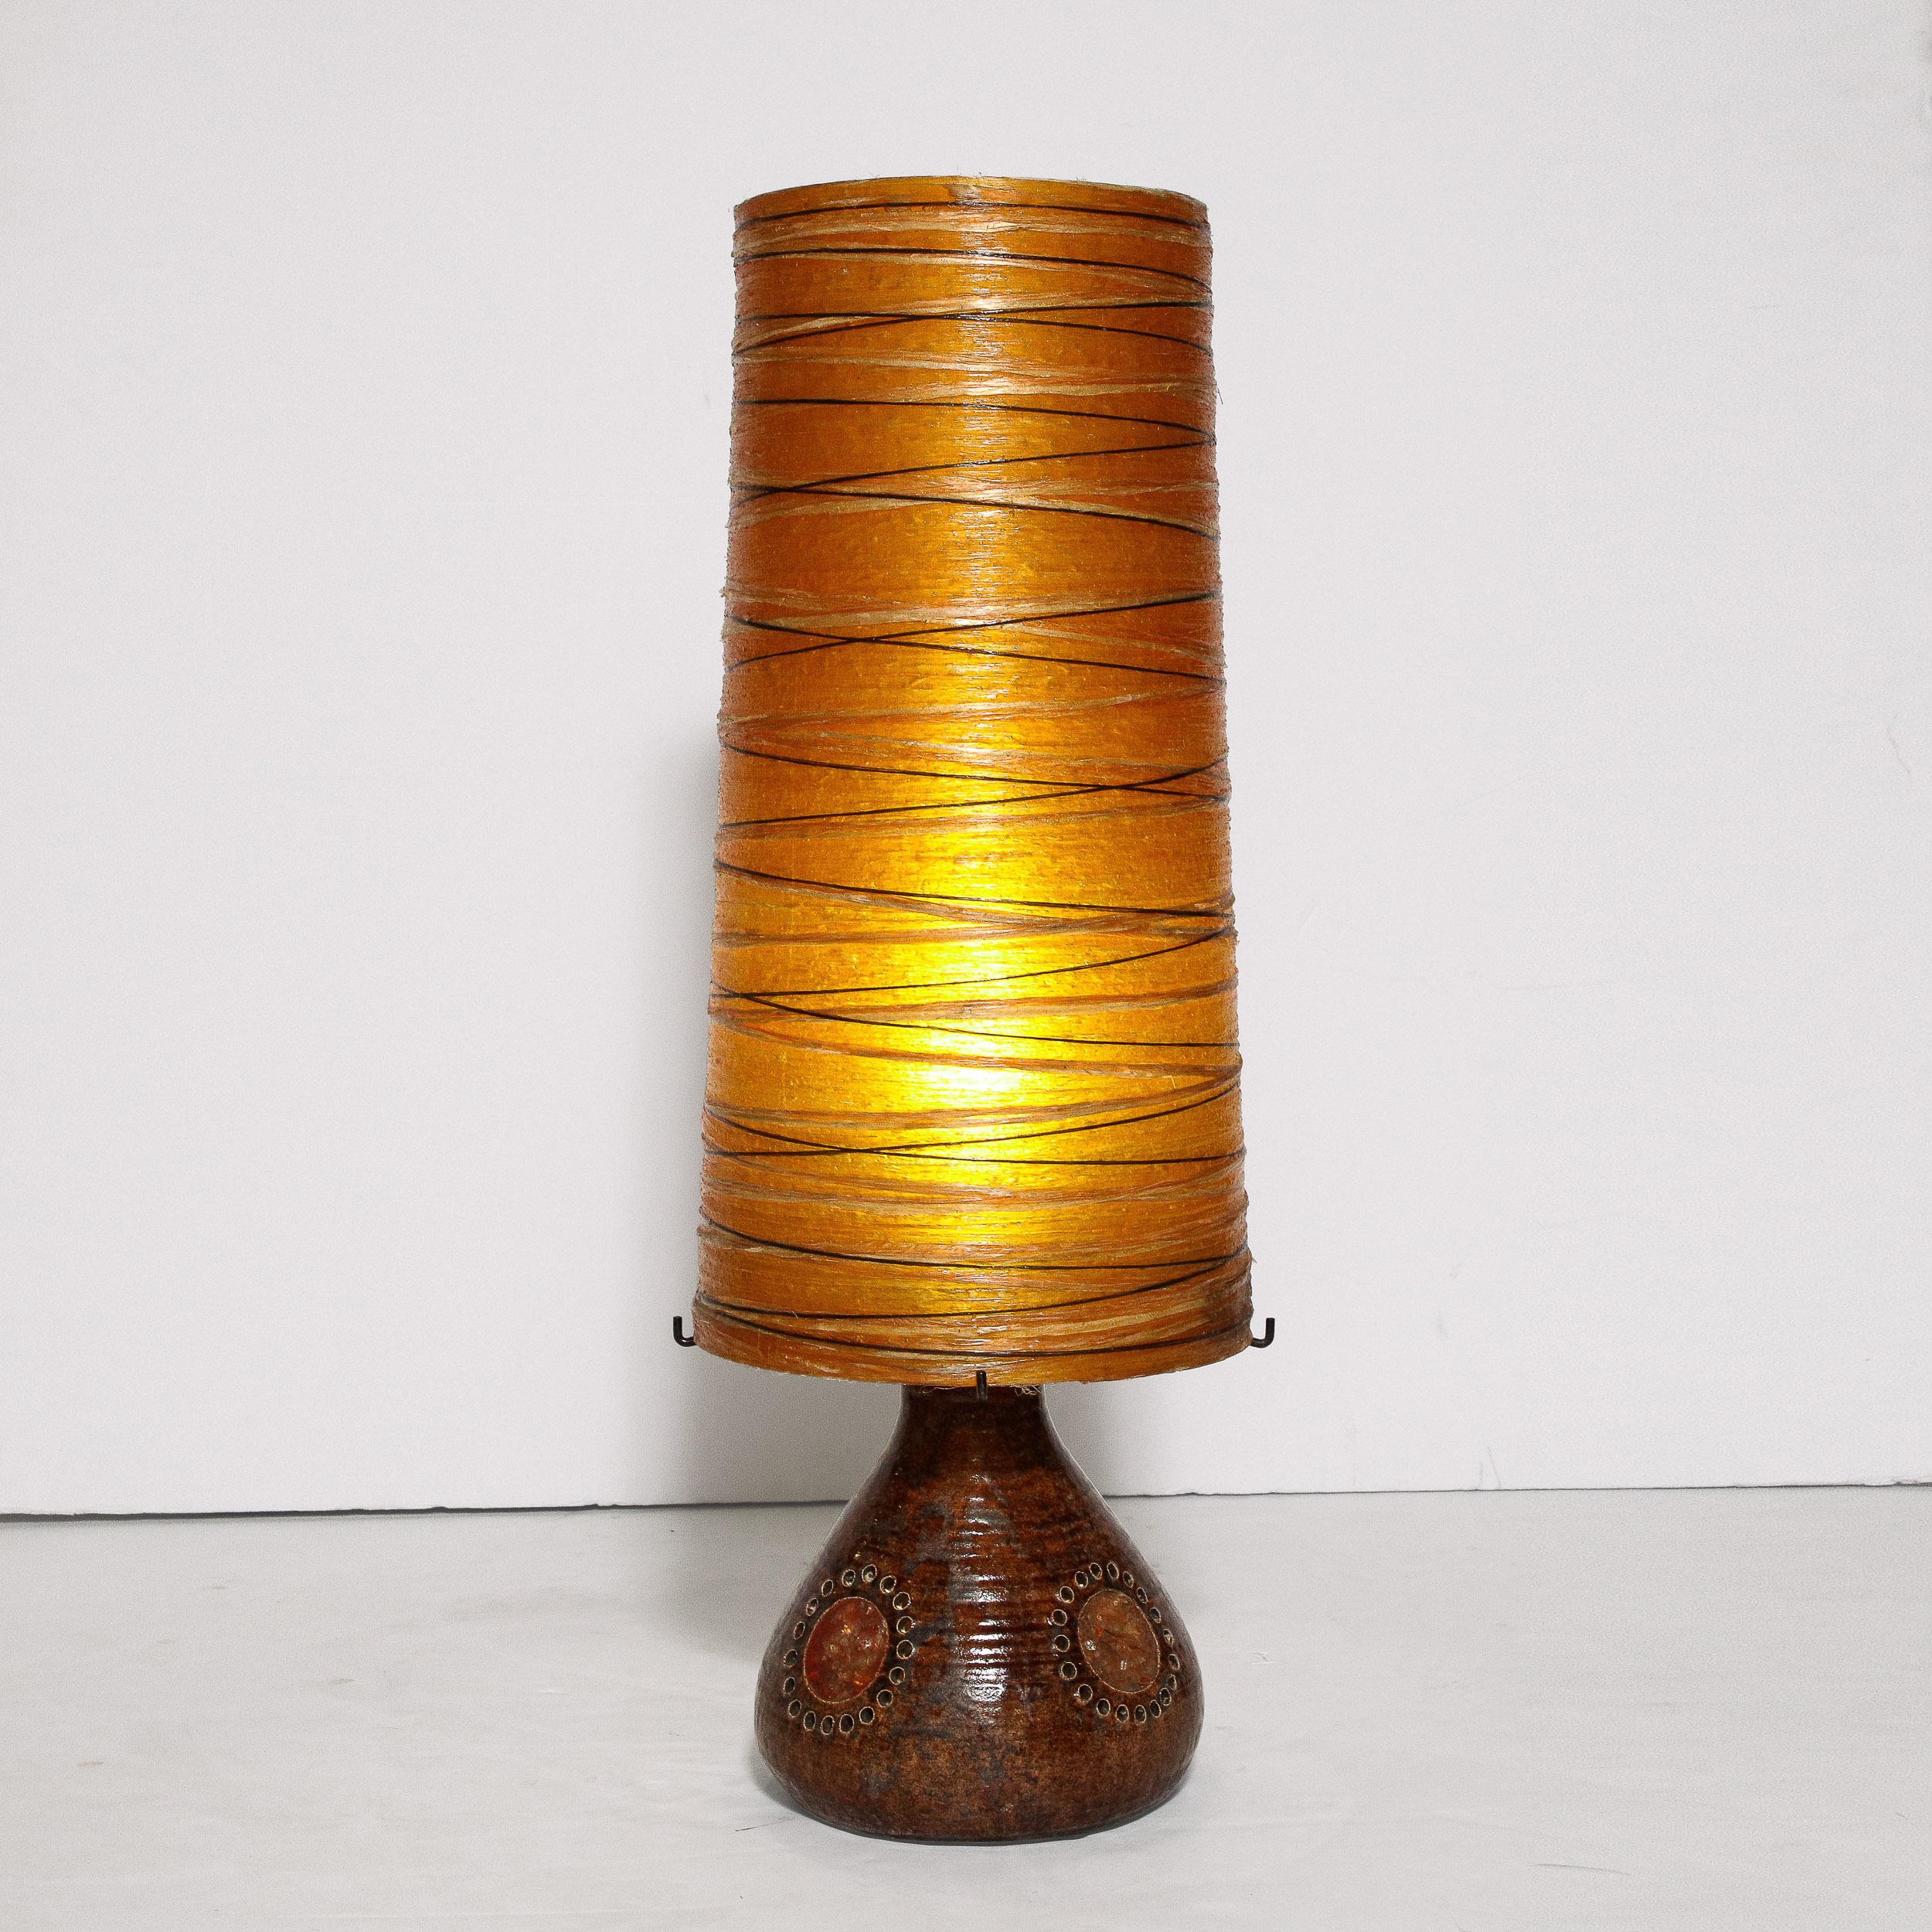 This beautiful Mid-Century Modern brutalist table lamp was realized in France, circa 1960. It features a spherical body in a rich umber hue with spherical detailing in brick red encircled by pierced circular incisions- a la Georges Pelletier. The